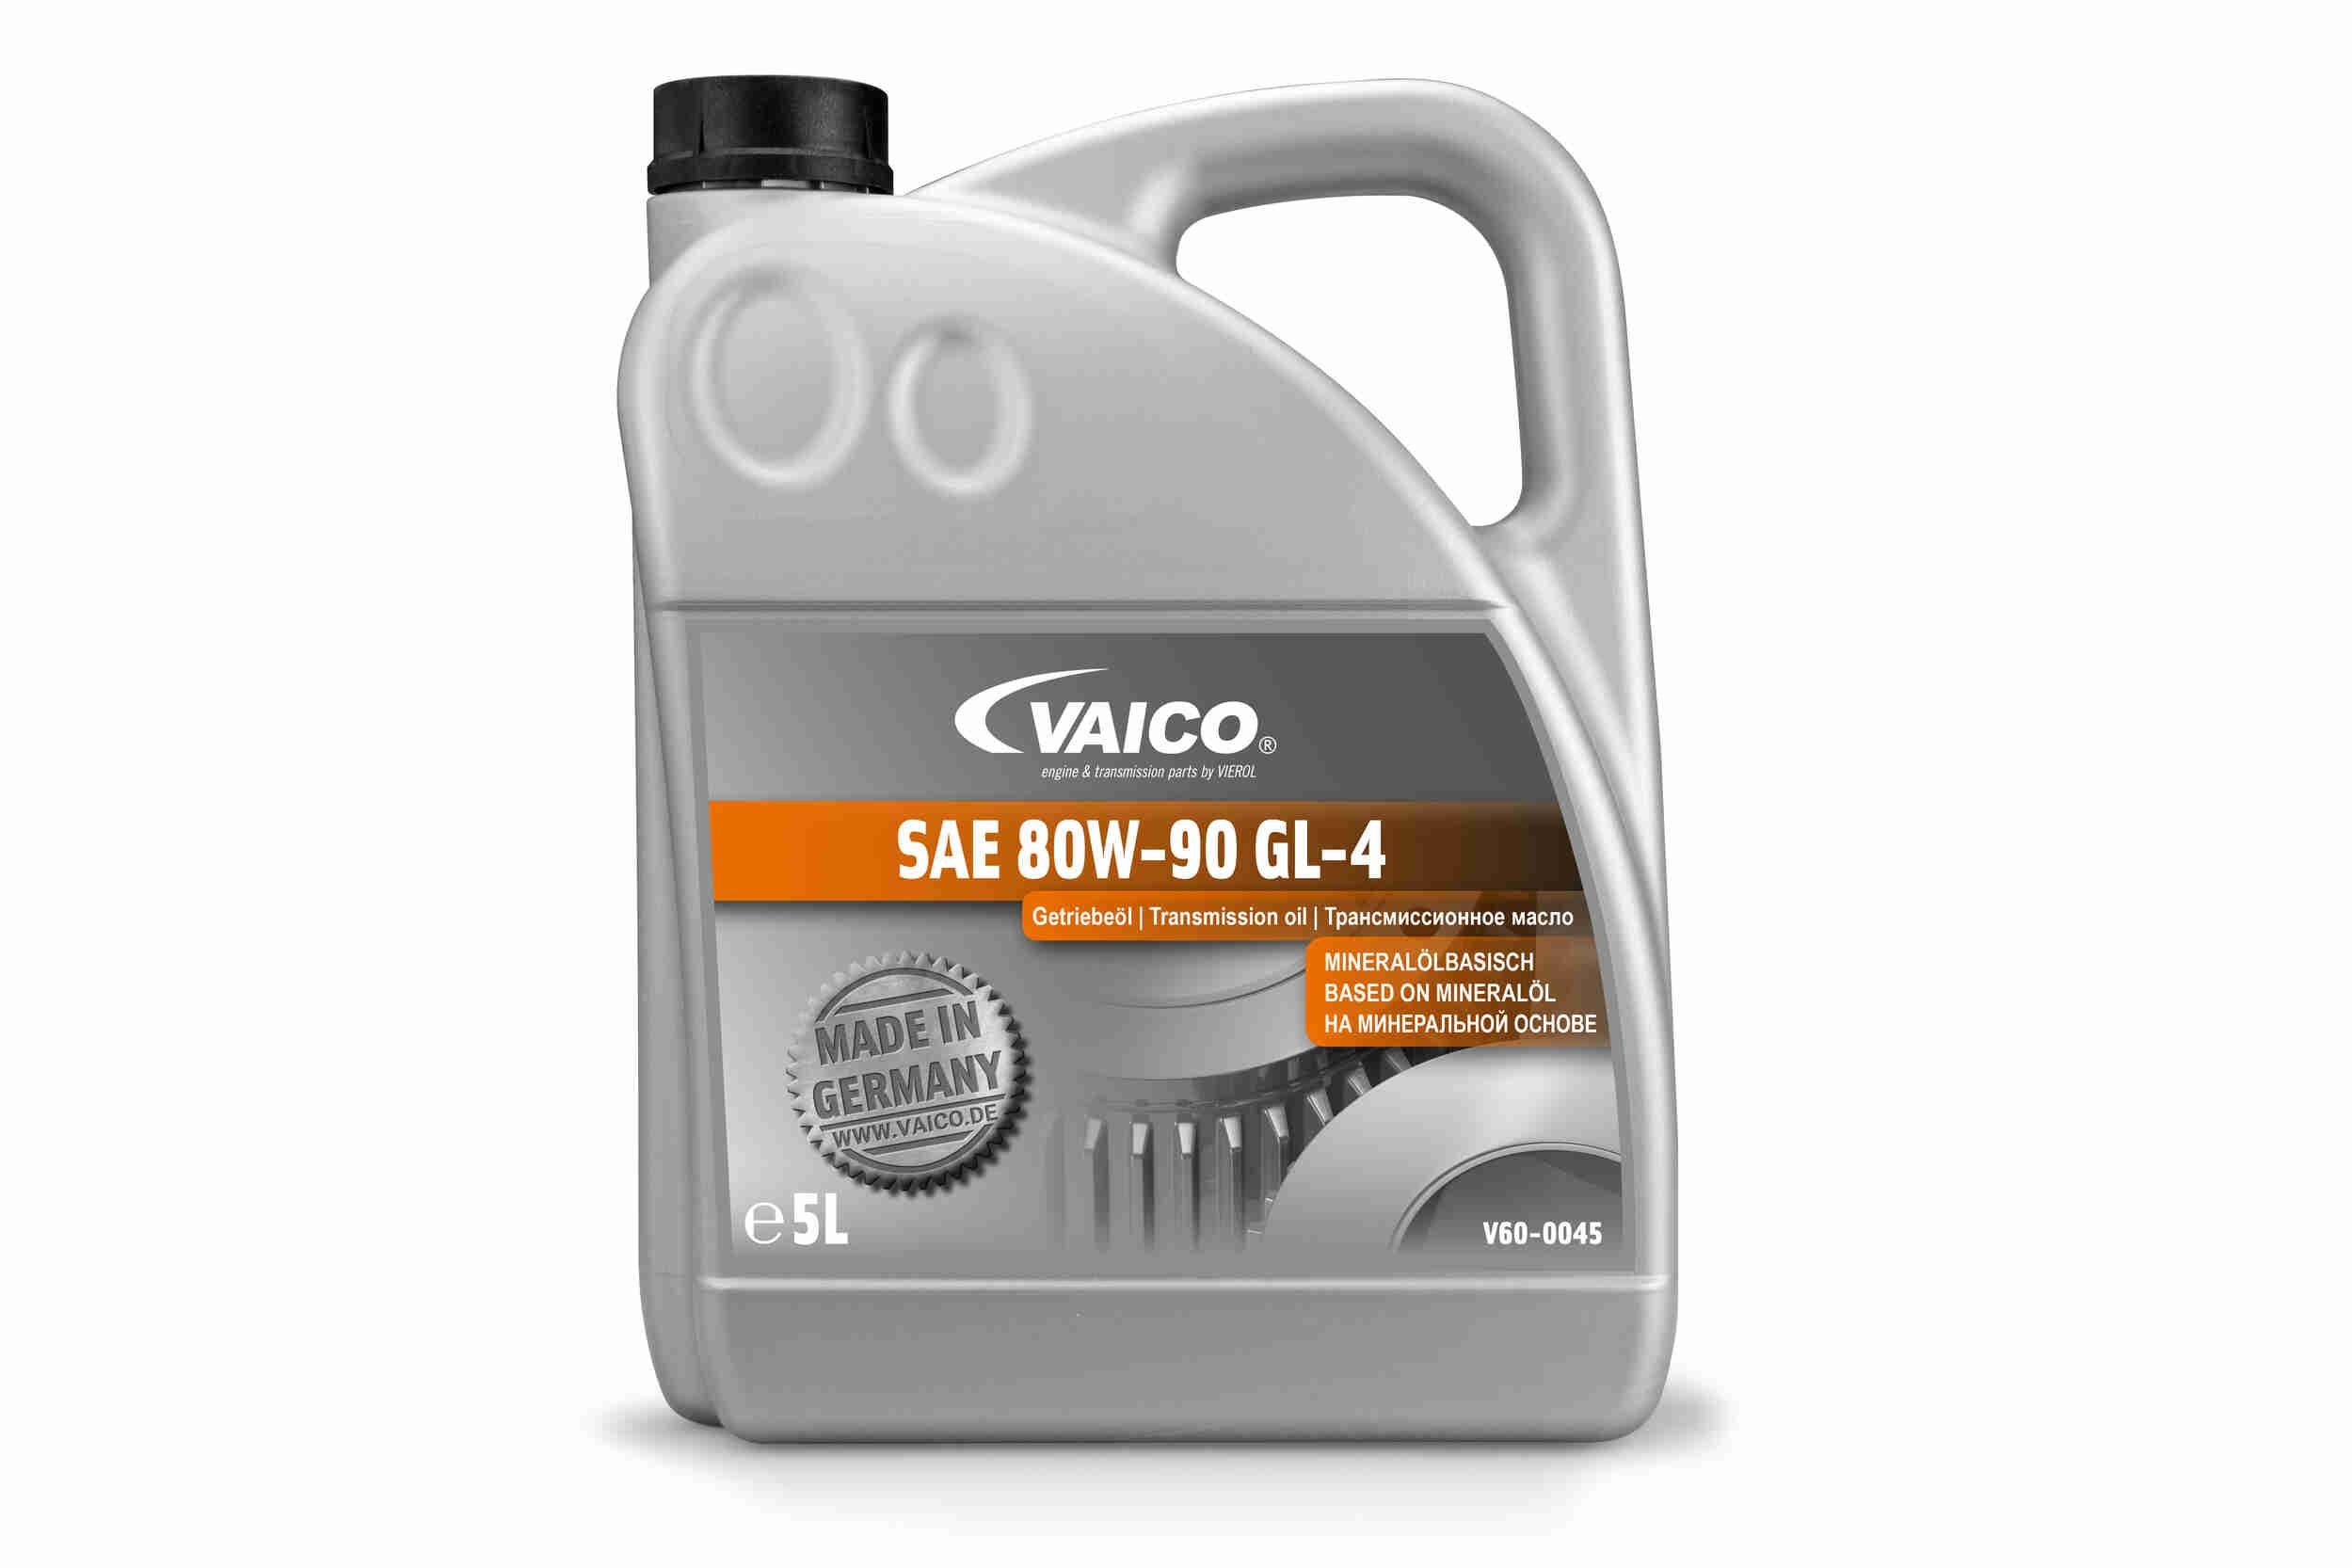 VAICO V60-0045 Manual Transmission Oil Capacity: 5l, 80W-90, Q+, original equipment manufacturer quality MADE IN GERMANY